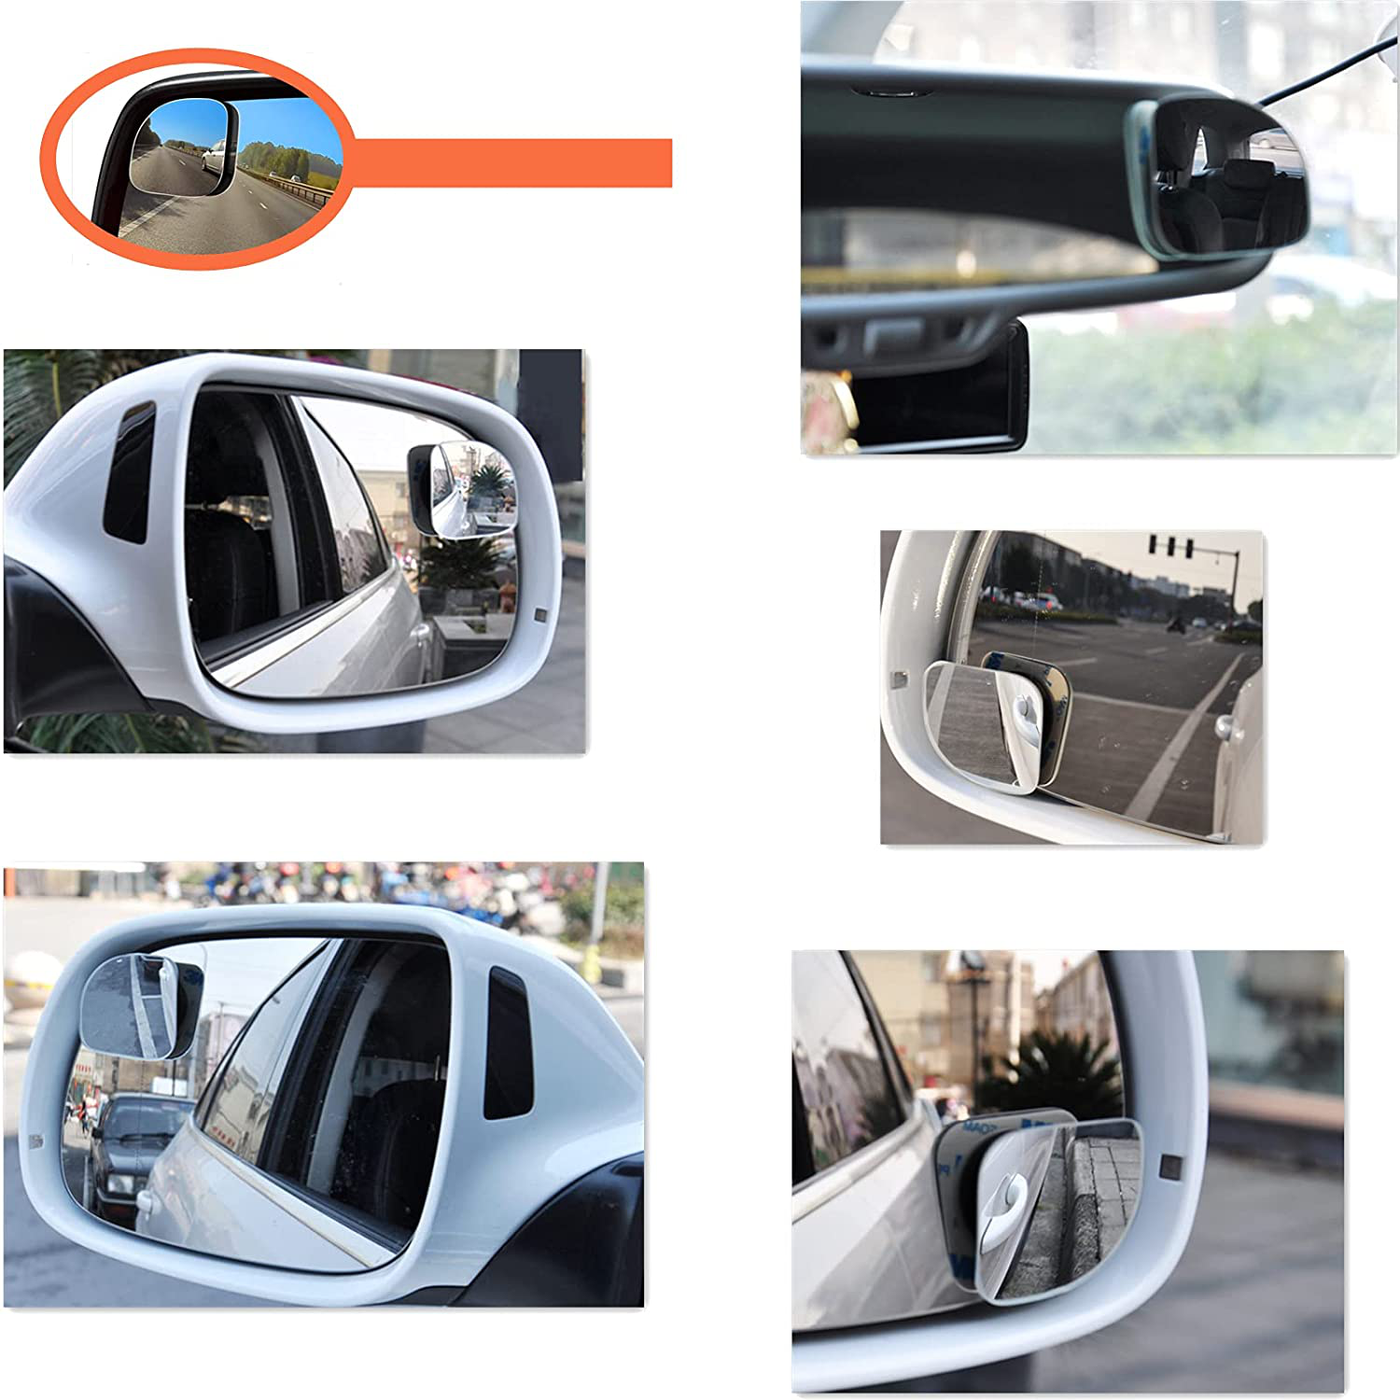 TINGQIAO Blind Spot Mirrors,HD Glass Convex Rear View Mirror, 360 ABS HD Ultra Low-Profile Glass Fit Stick-on Design Fit for All Universal Vehicles Car SUV Truck RVs Vans(Pack of 2) (Sector)